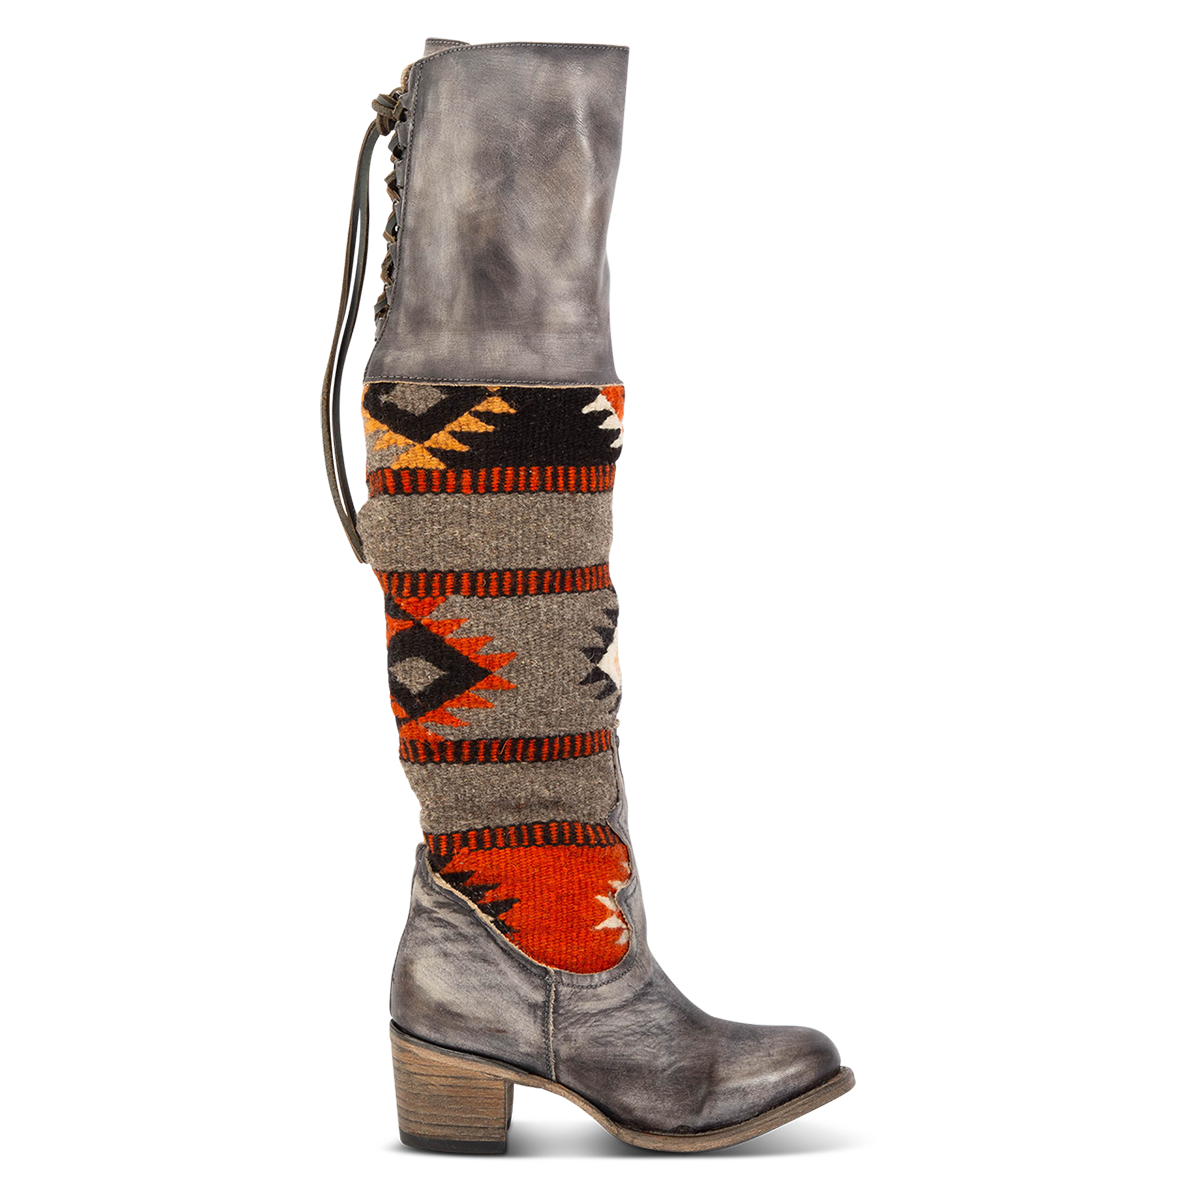 FREEBIRD women's Serape stone leather knee high boot with woven detailing, leather tie lacing and an inside working brass zip closure